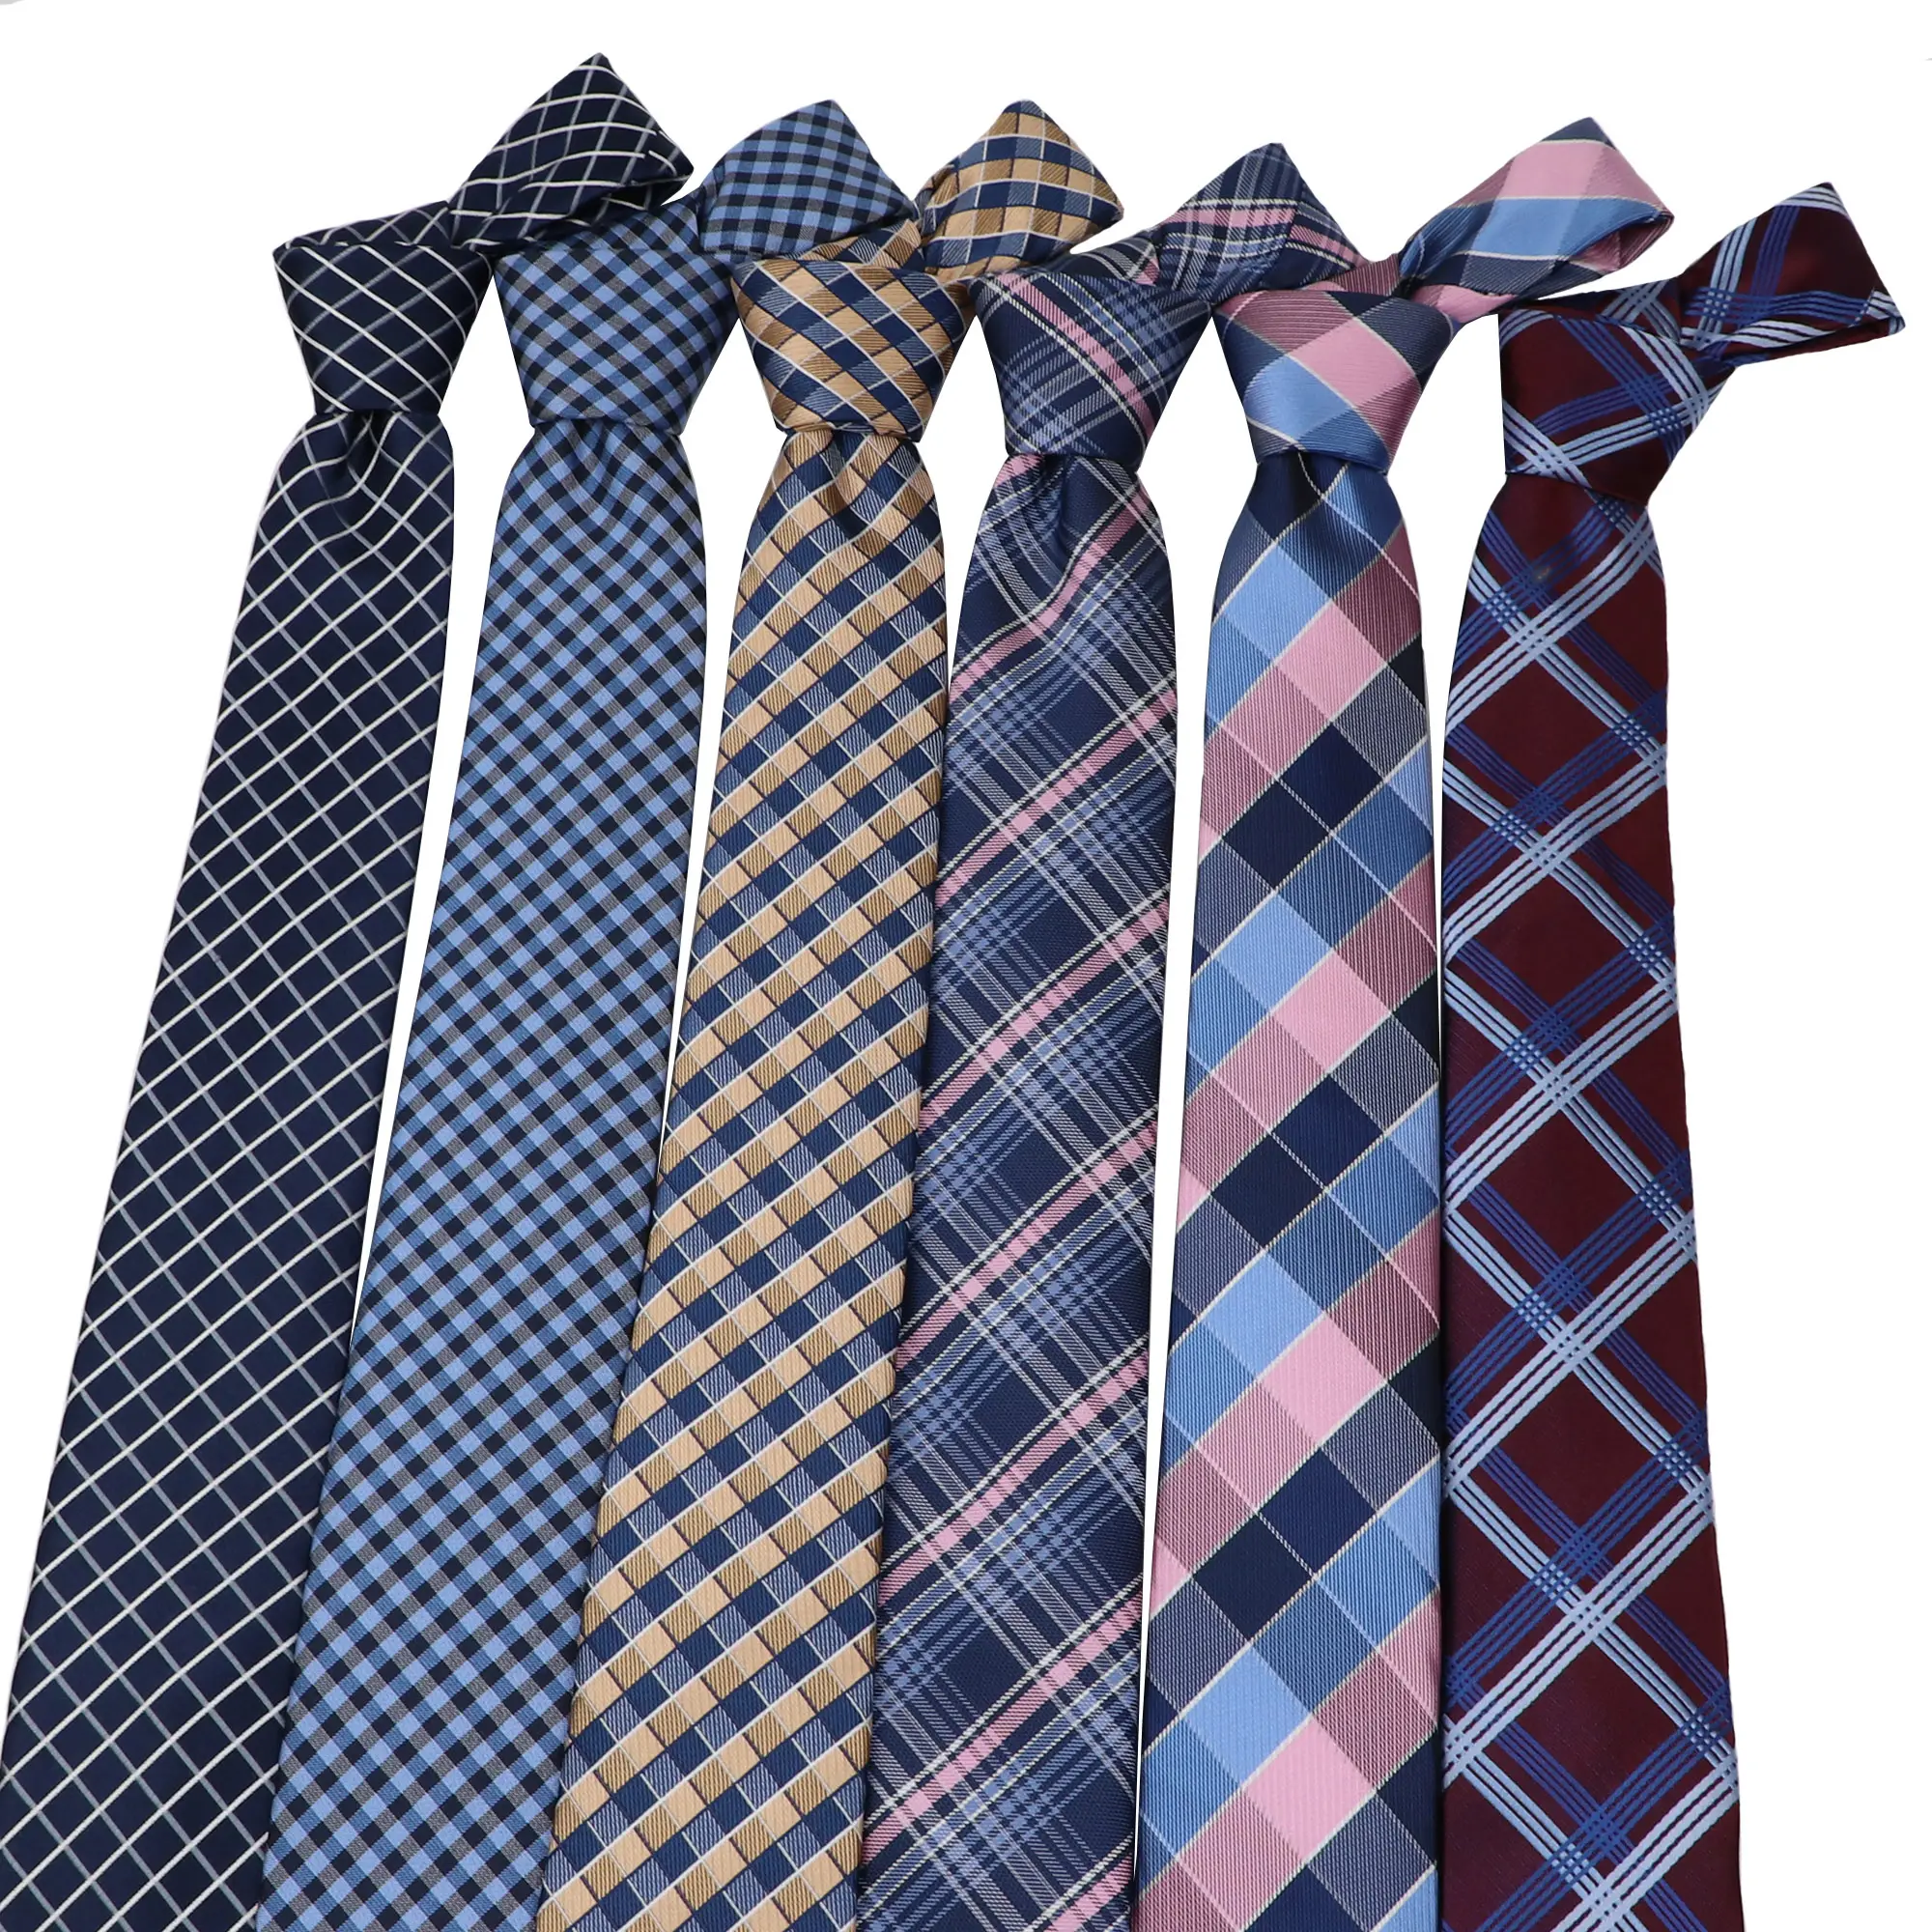 Casual 7cm Plaid Ties For Men Skinny Red Blue Tie Fashion Polyester Strip Necktie Business Slim Shirt Accessories Gift Cravate